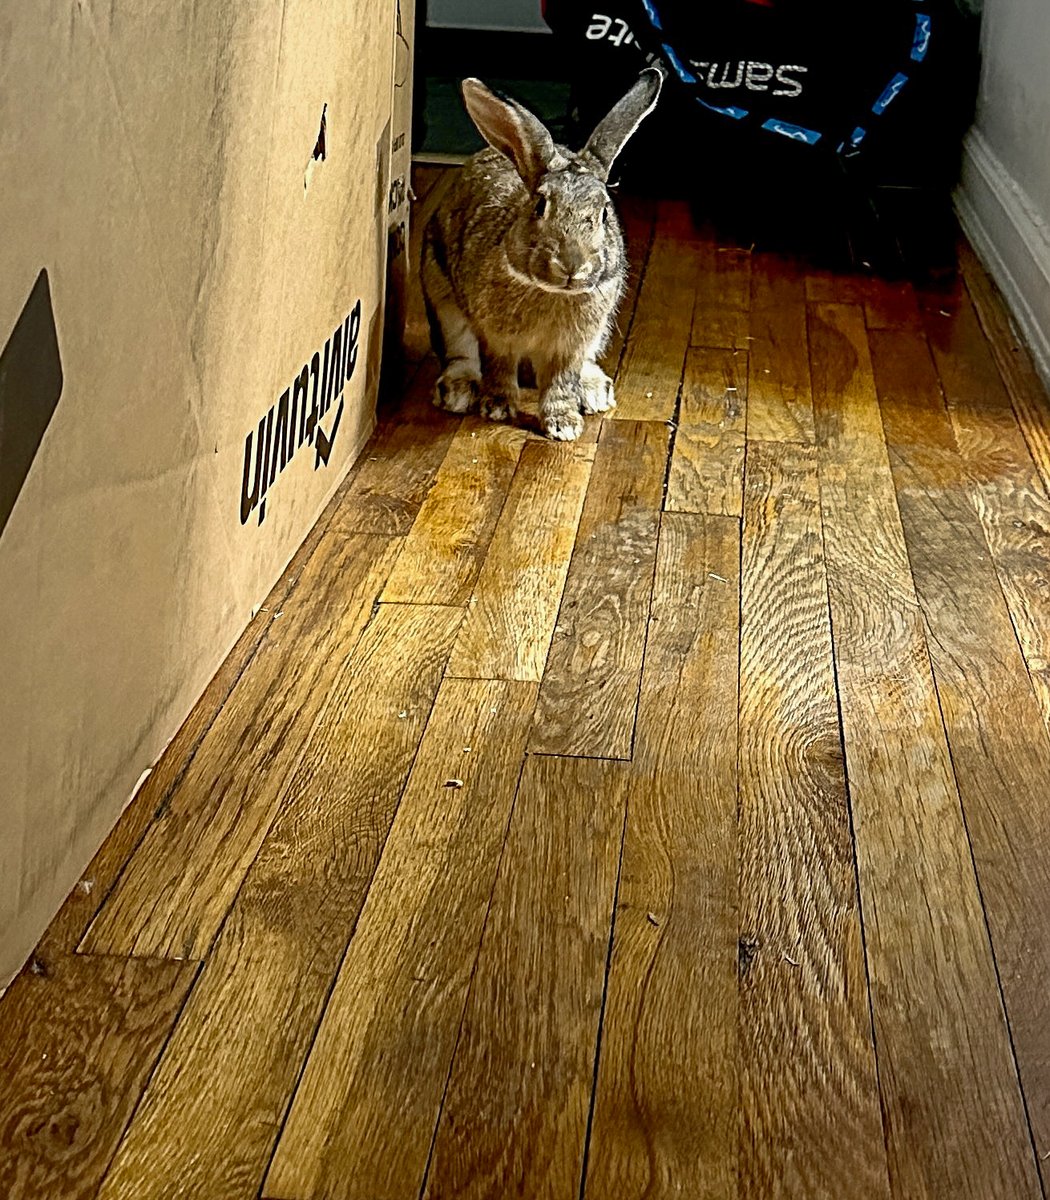 Left: photo of an E. Cottontail w/Flompers taken by a park-goer 6:45pm Mon 3/20 in Prospect Park's Vale of Cashmere. Right: Flompers hopping laps in my hallway 6:20pm Tues 3/21. Wild buns can transmit the RHDV2 virus to domestic rescues, requiring a 5-day (fun-filled) quarantine.